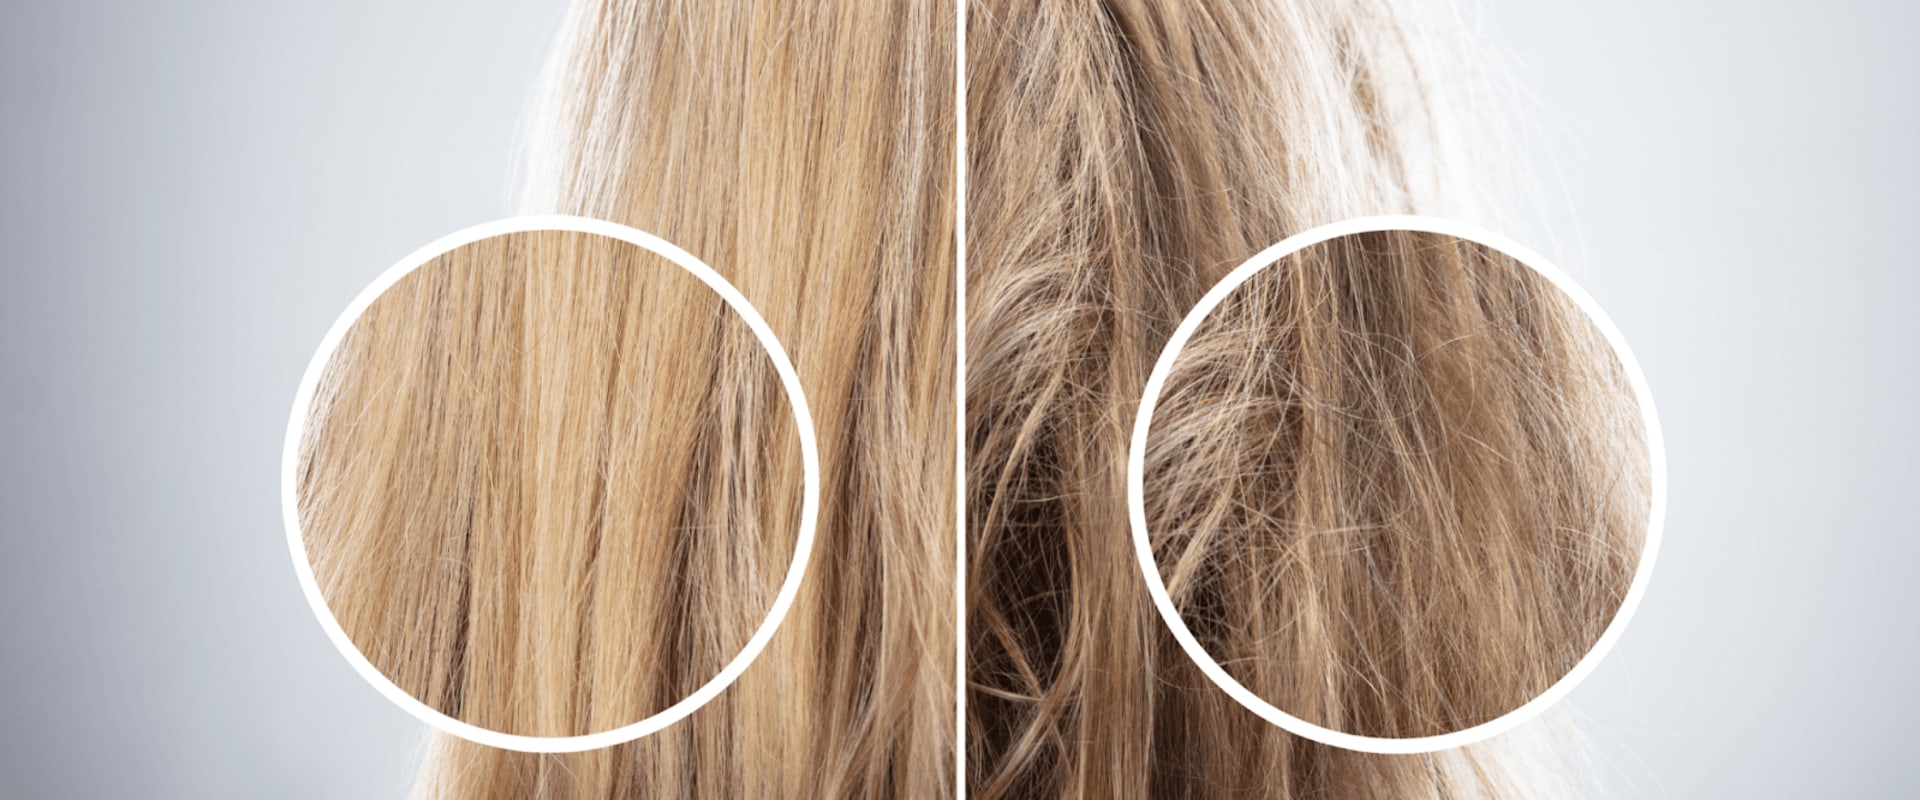 Hair Botox in London: Can You Get It If You Have Dyed or Chemically Treated Hair?